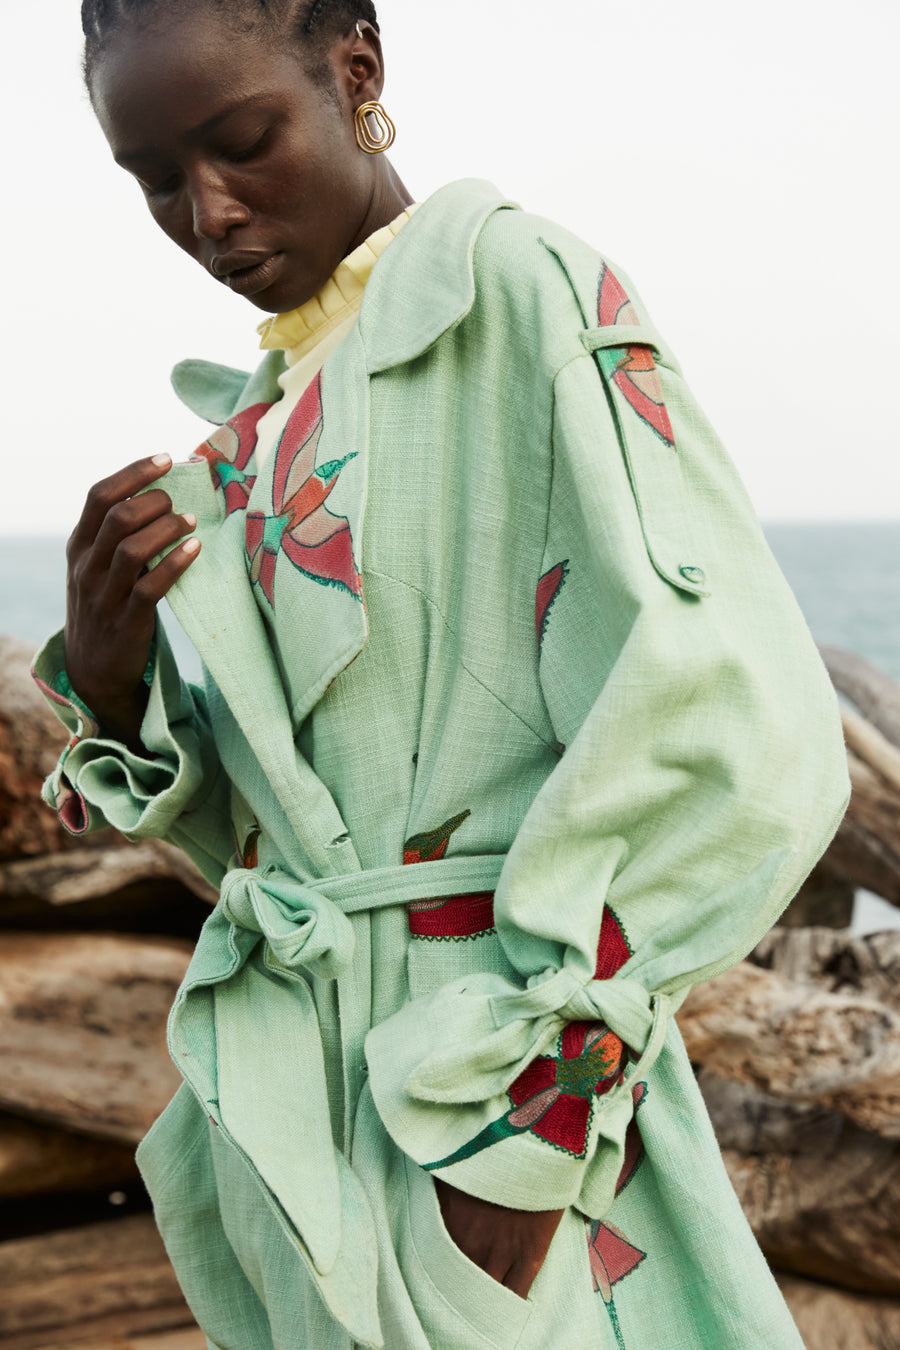 Bee Eater embroidered Trench Coat